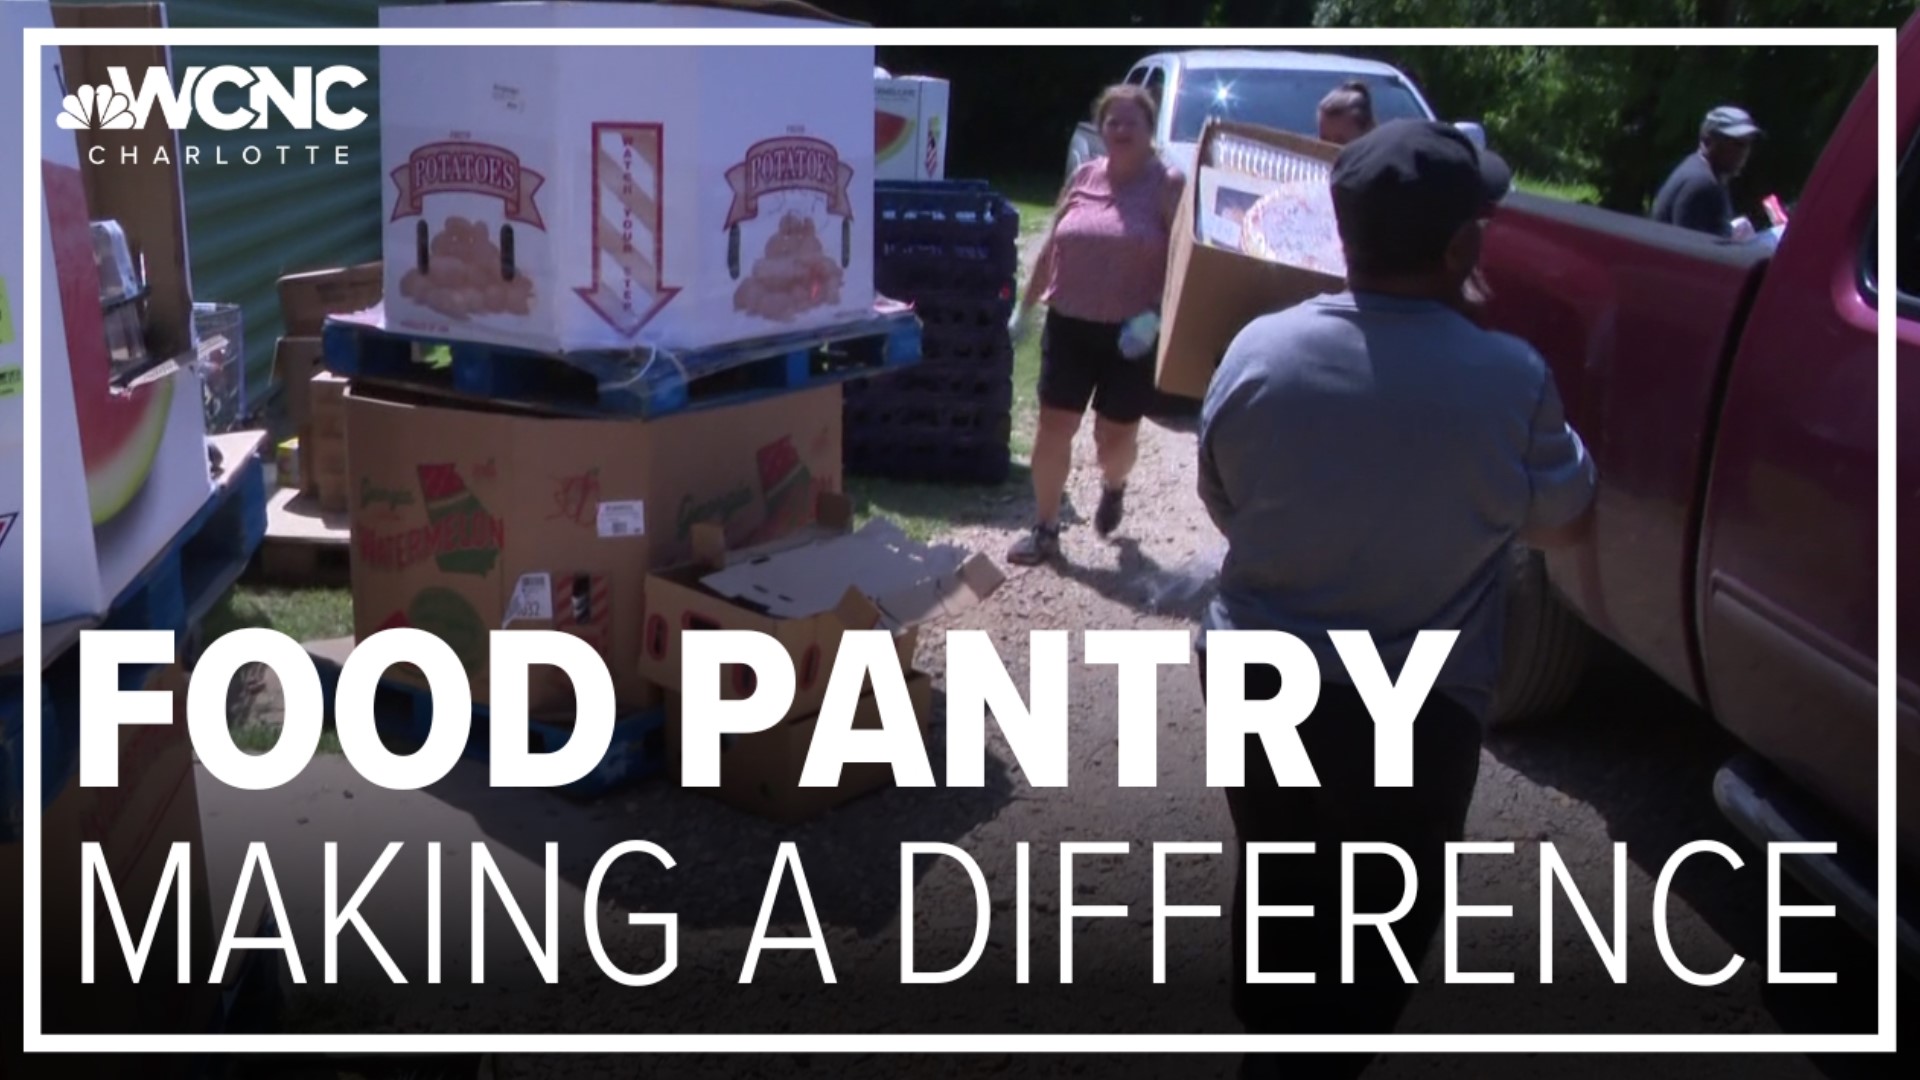 The Love N Cherish food pantry was created for that very reason, to help struggling families, the homeless and underprivileged.